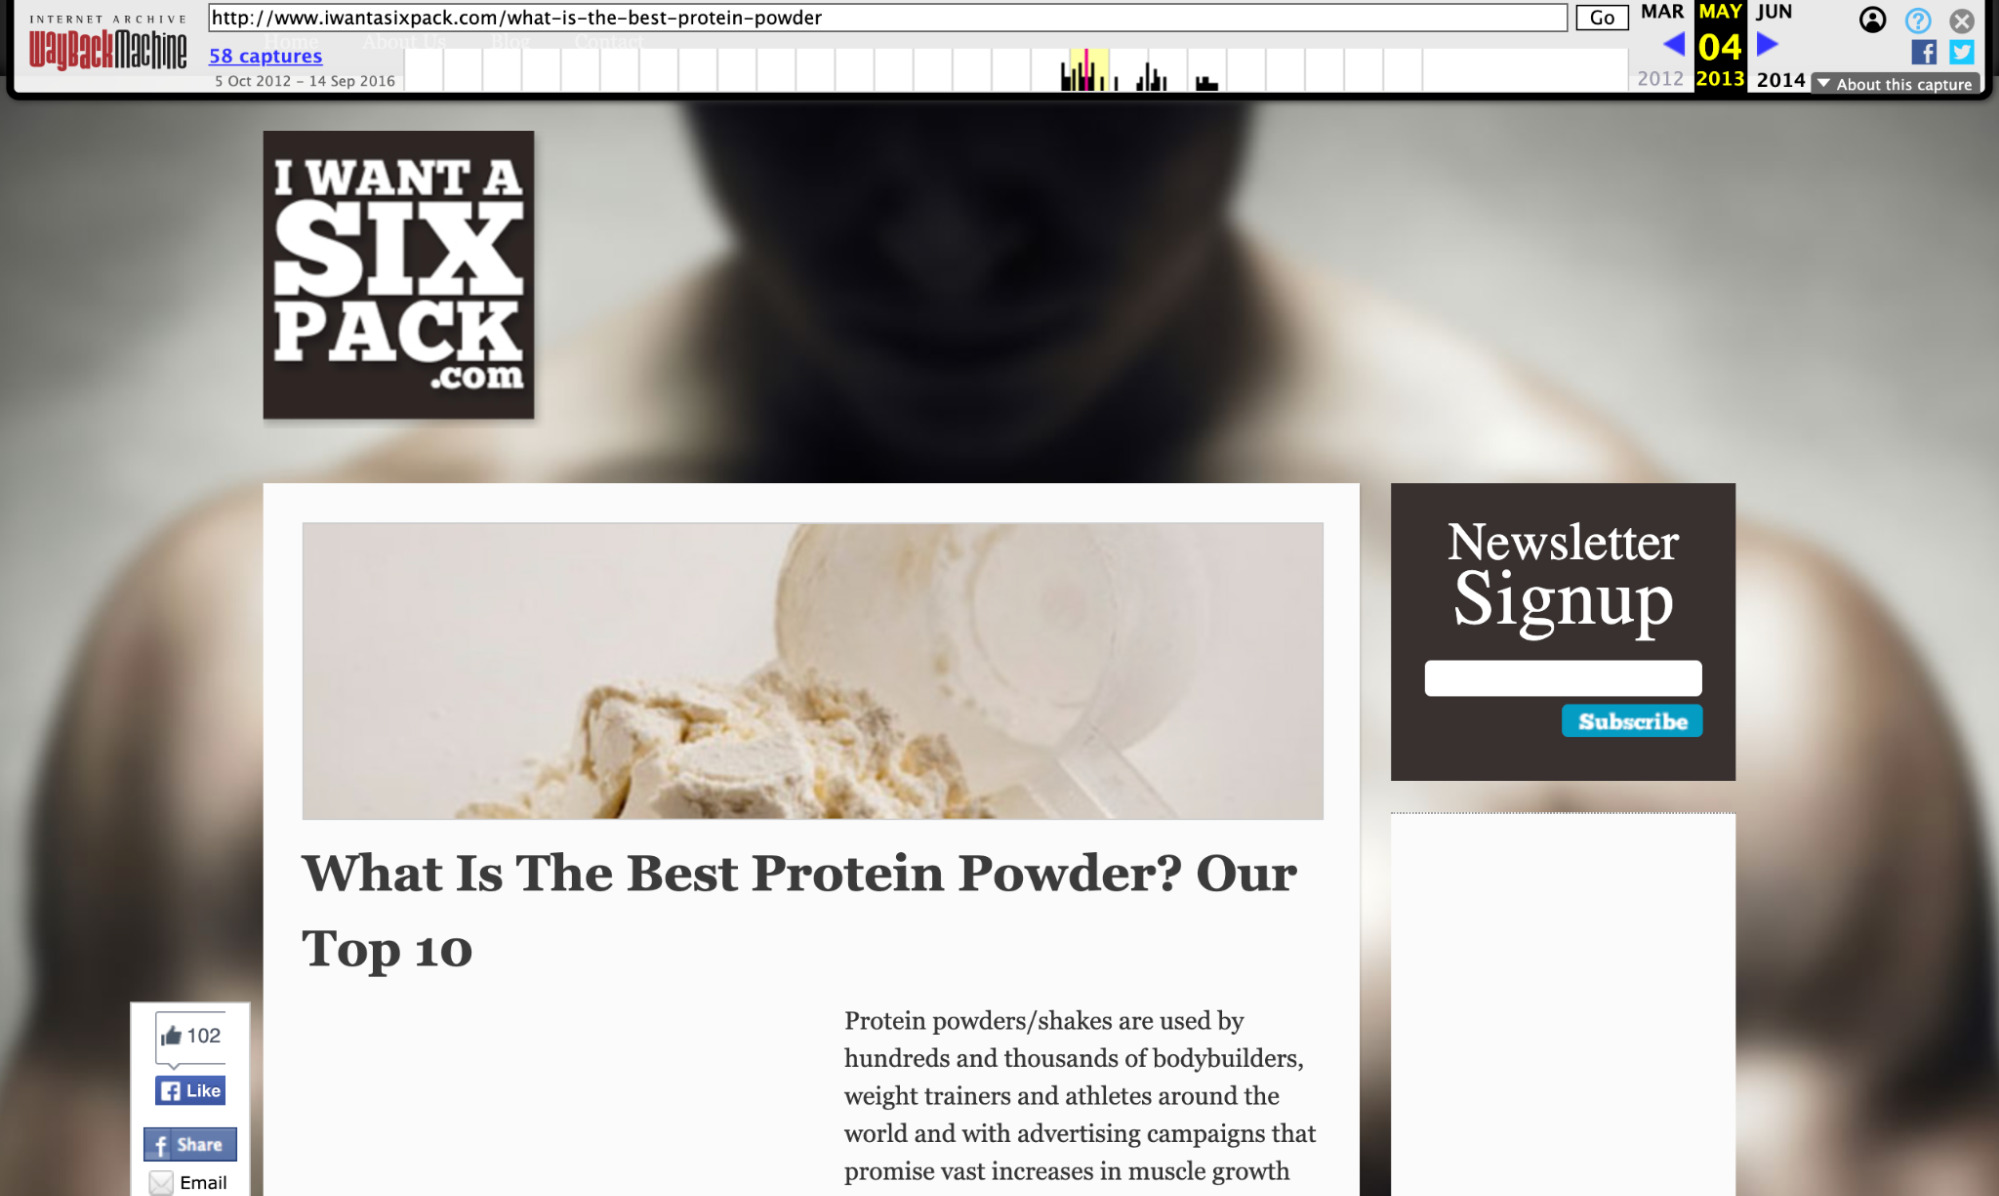 Excerpt of article about best types of protein powder